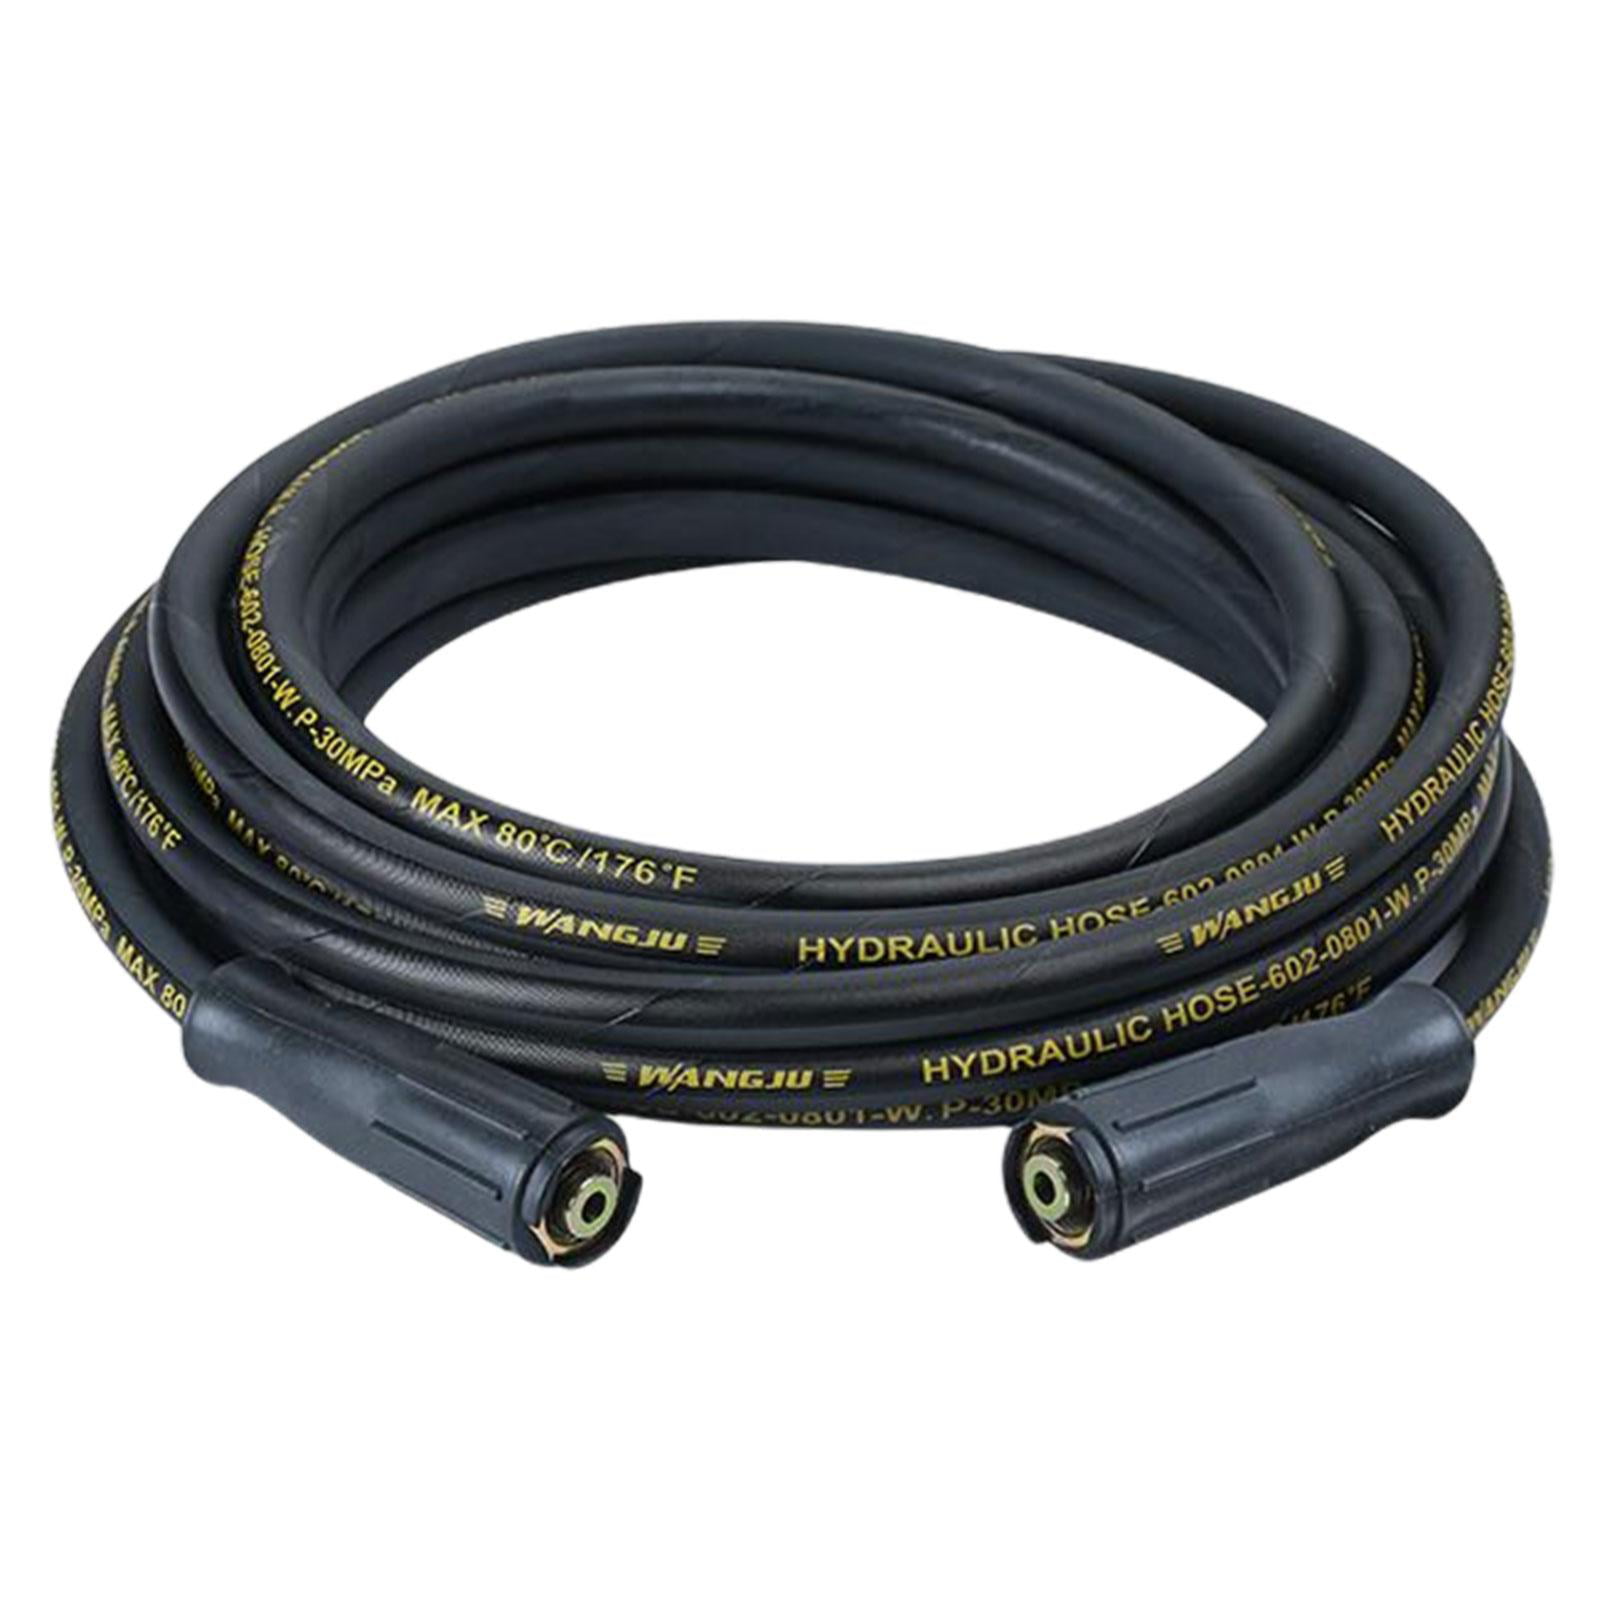 New 8 Metre RAC Pressure Power Washer Drain Cleaning Jetting Hose Eight 8M M 